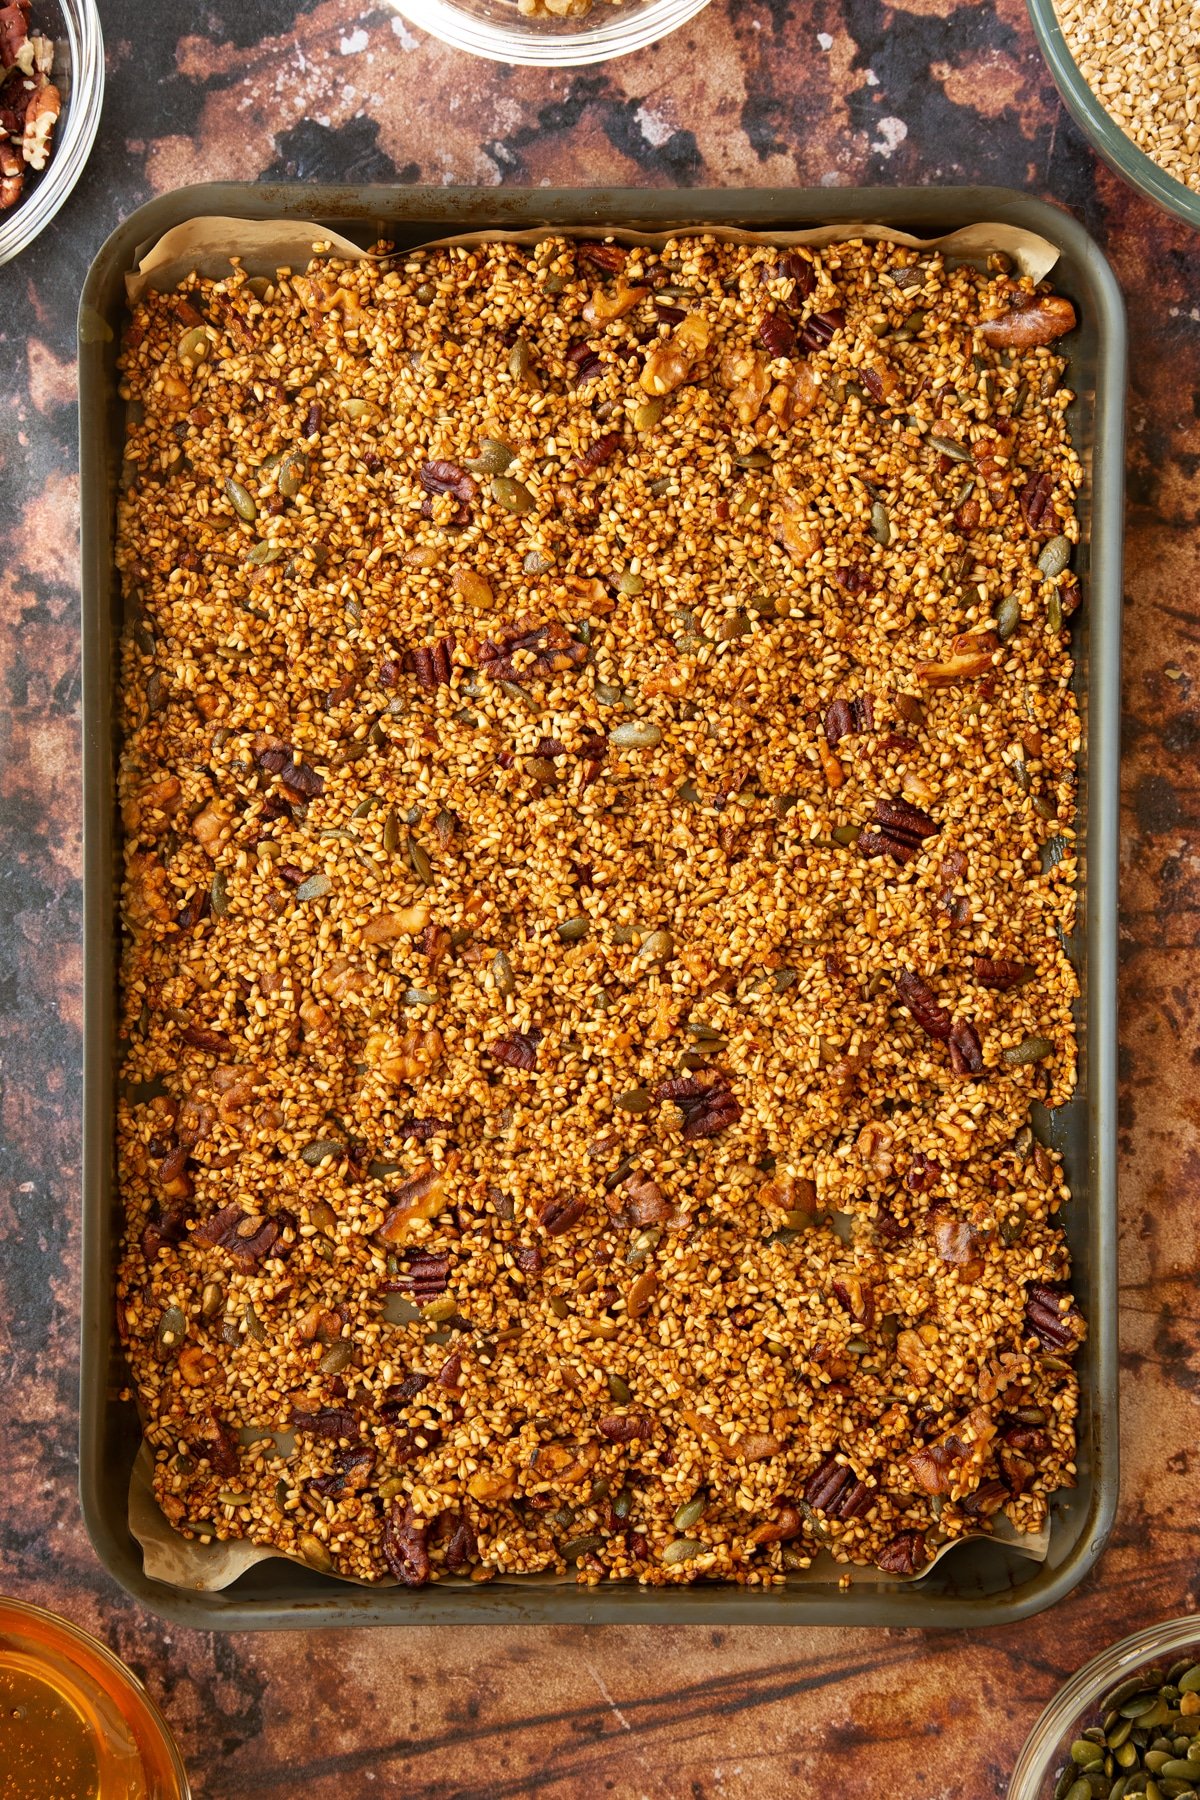 cooked steel cut oats mixture laid out on a baking tray lined with baking paper.